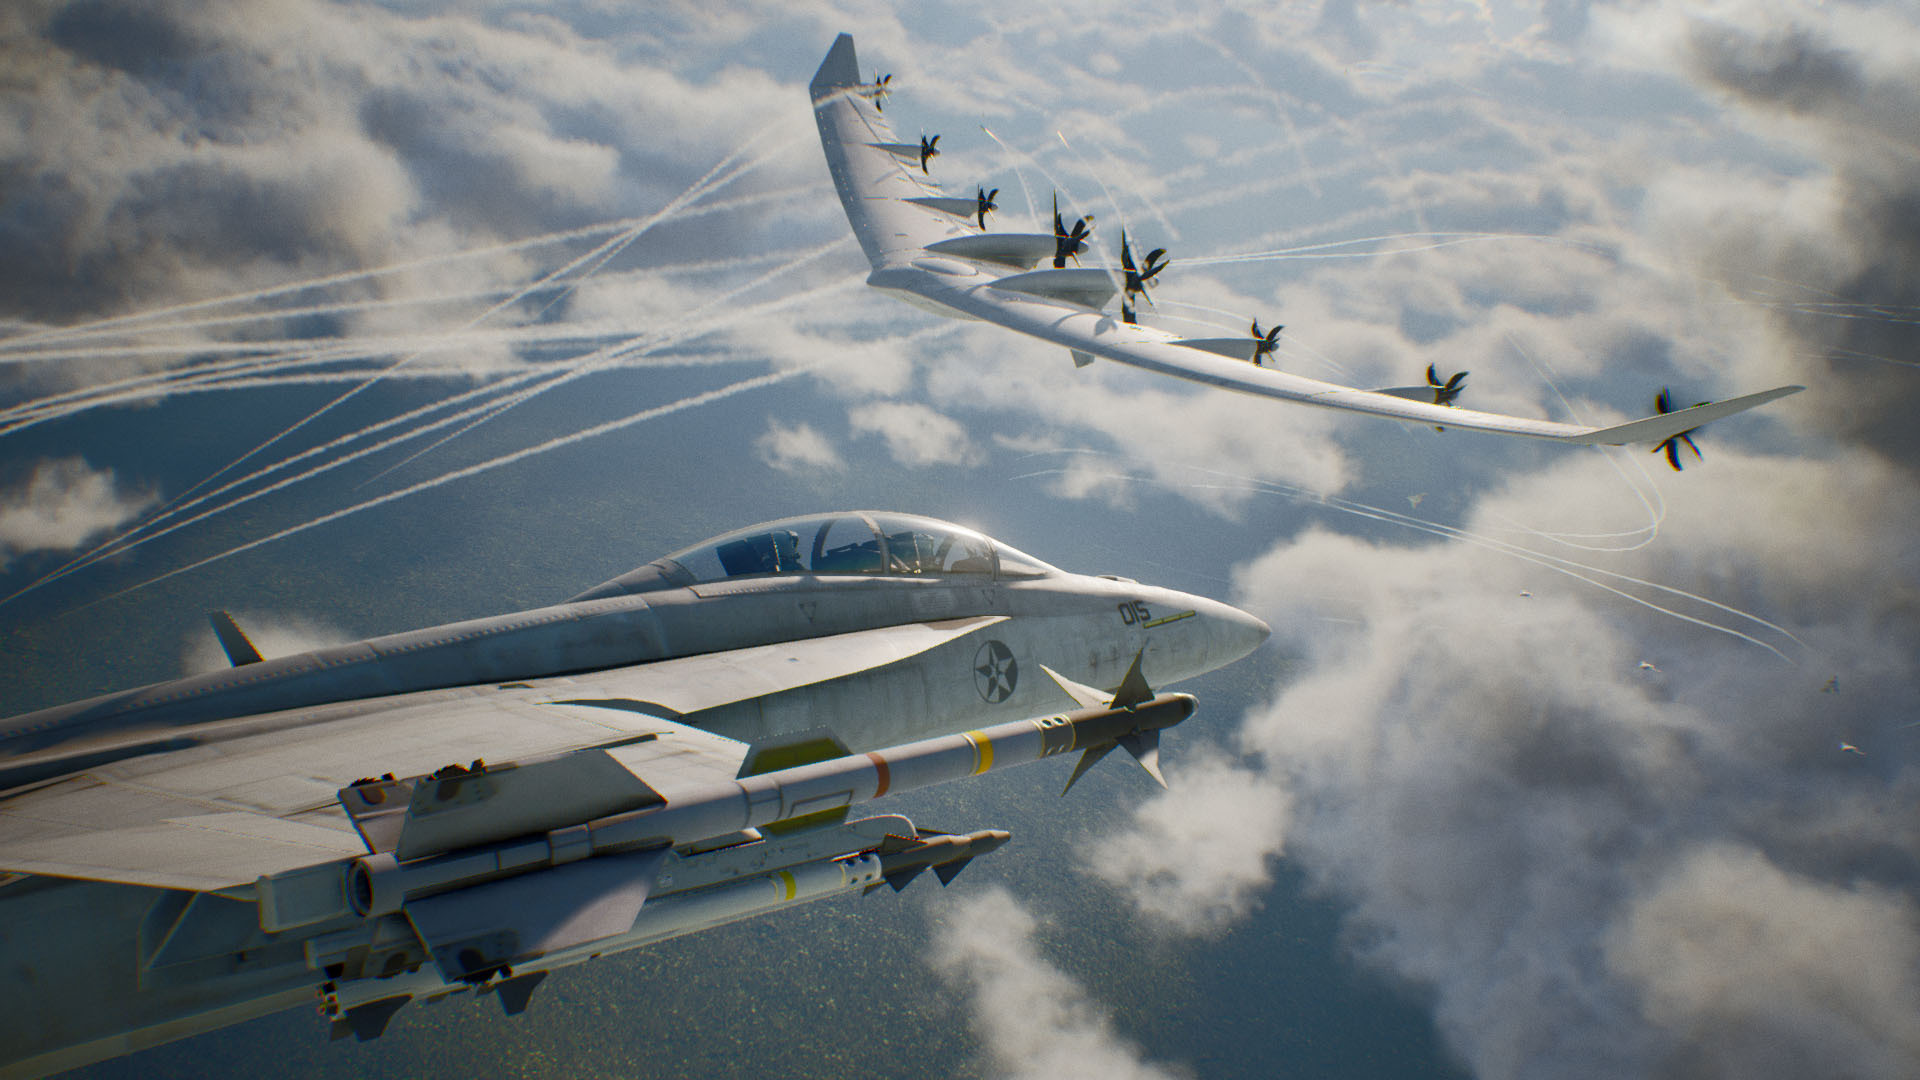 Ace Combat 7 Skies Unknown to Get New Aircraft Series DLC